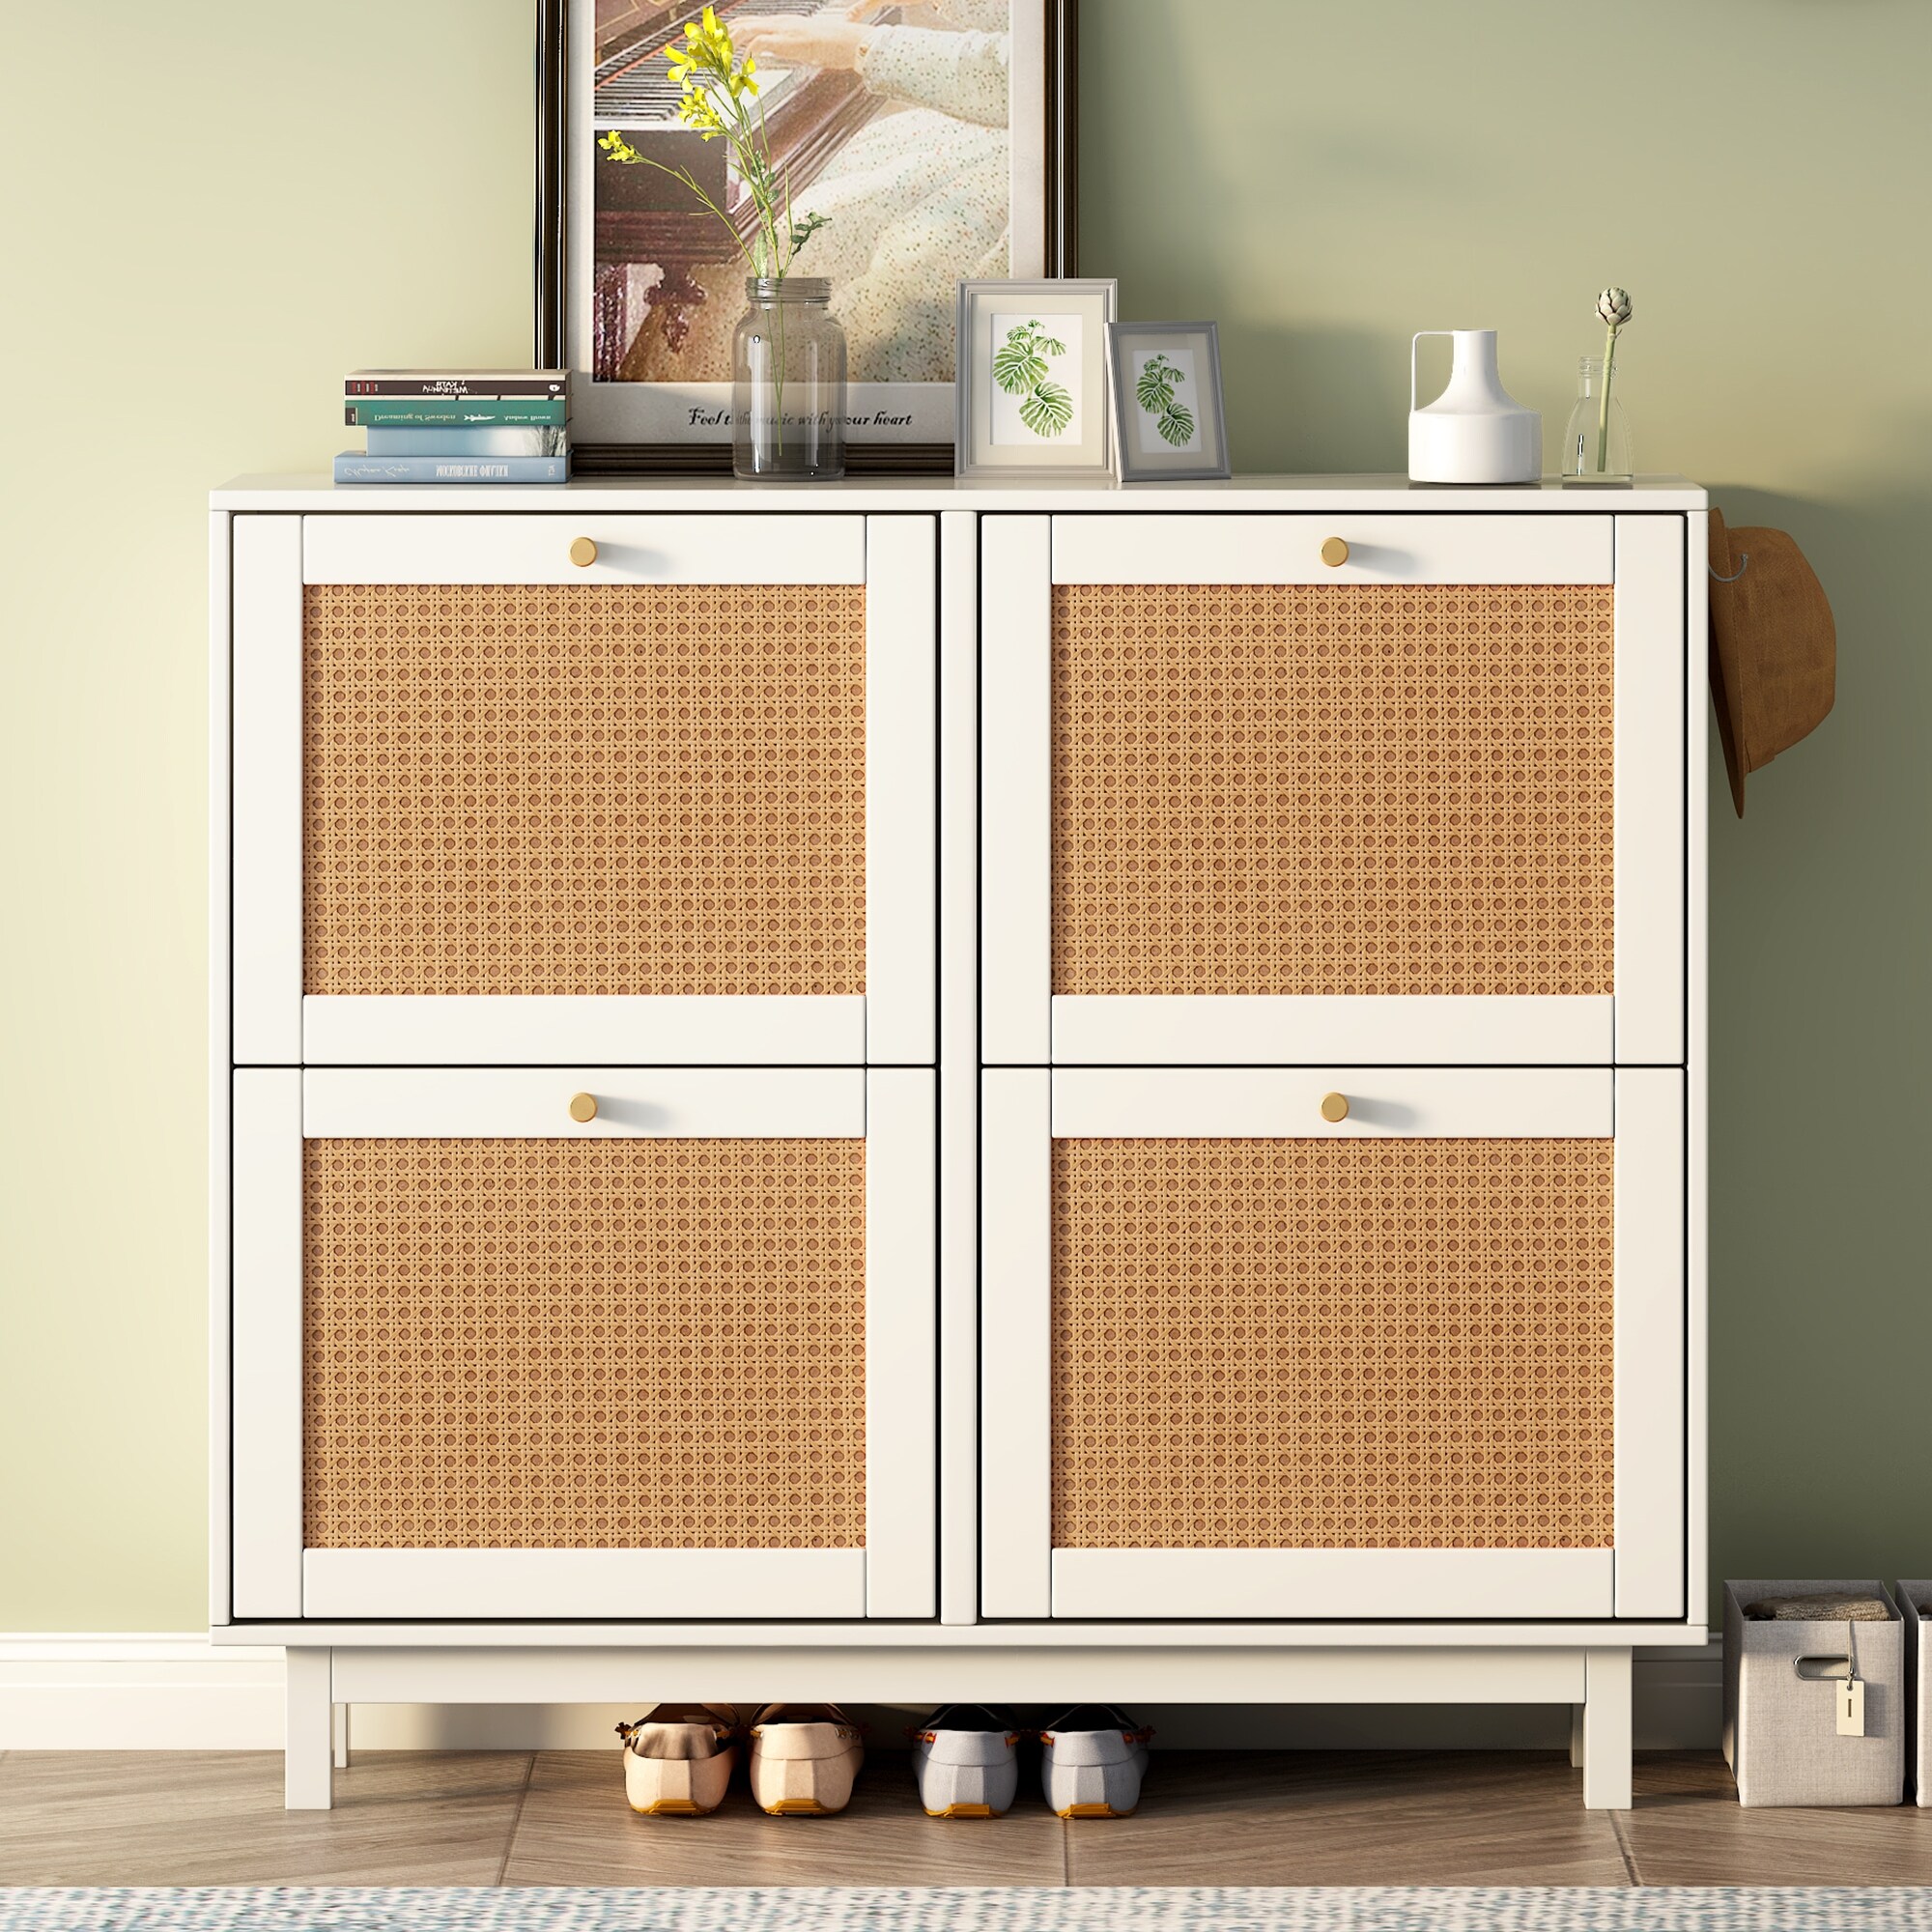 https://ak1.ostkcdn.com/images/products/is/images/direct/f29ba1ecb0395ba968a61ba1c7d6c06151eca833/Rattan-Boho-Style-Shoe-Cabinet-with-4-Flip-Drawers%2C-2-Tier-Free-Standing-Shoe-Rack-with-Large-Space%2C-for-Entrance-Hallway.jpg